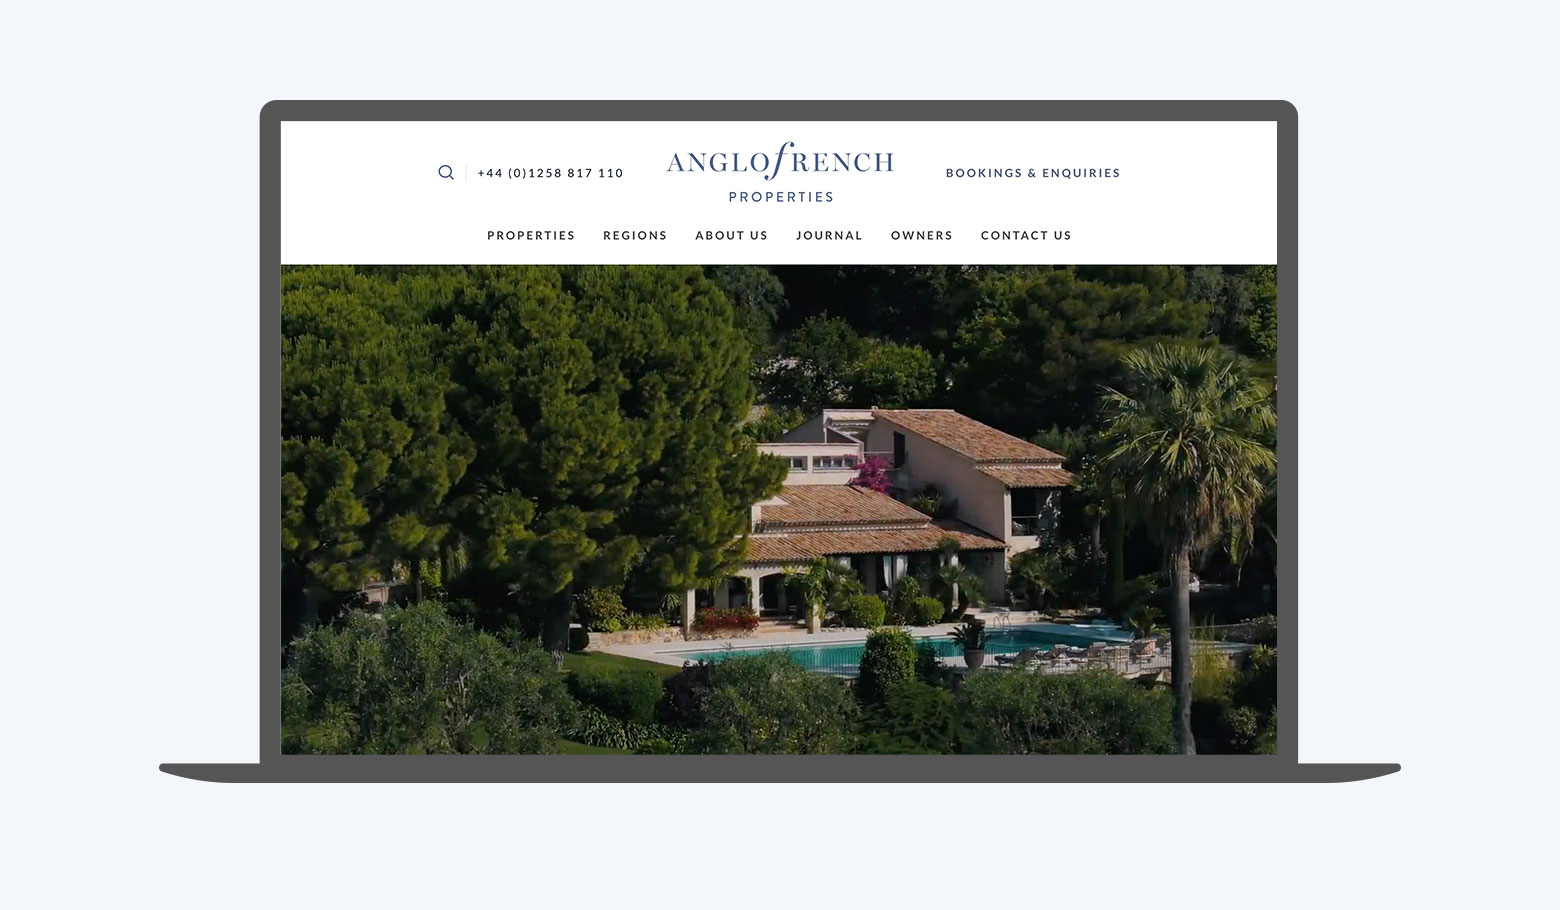 Anglo French Properties website on a laptop